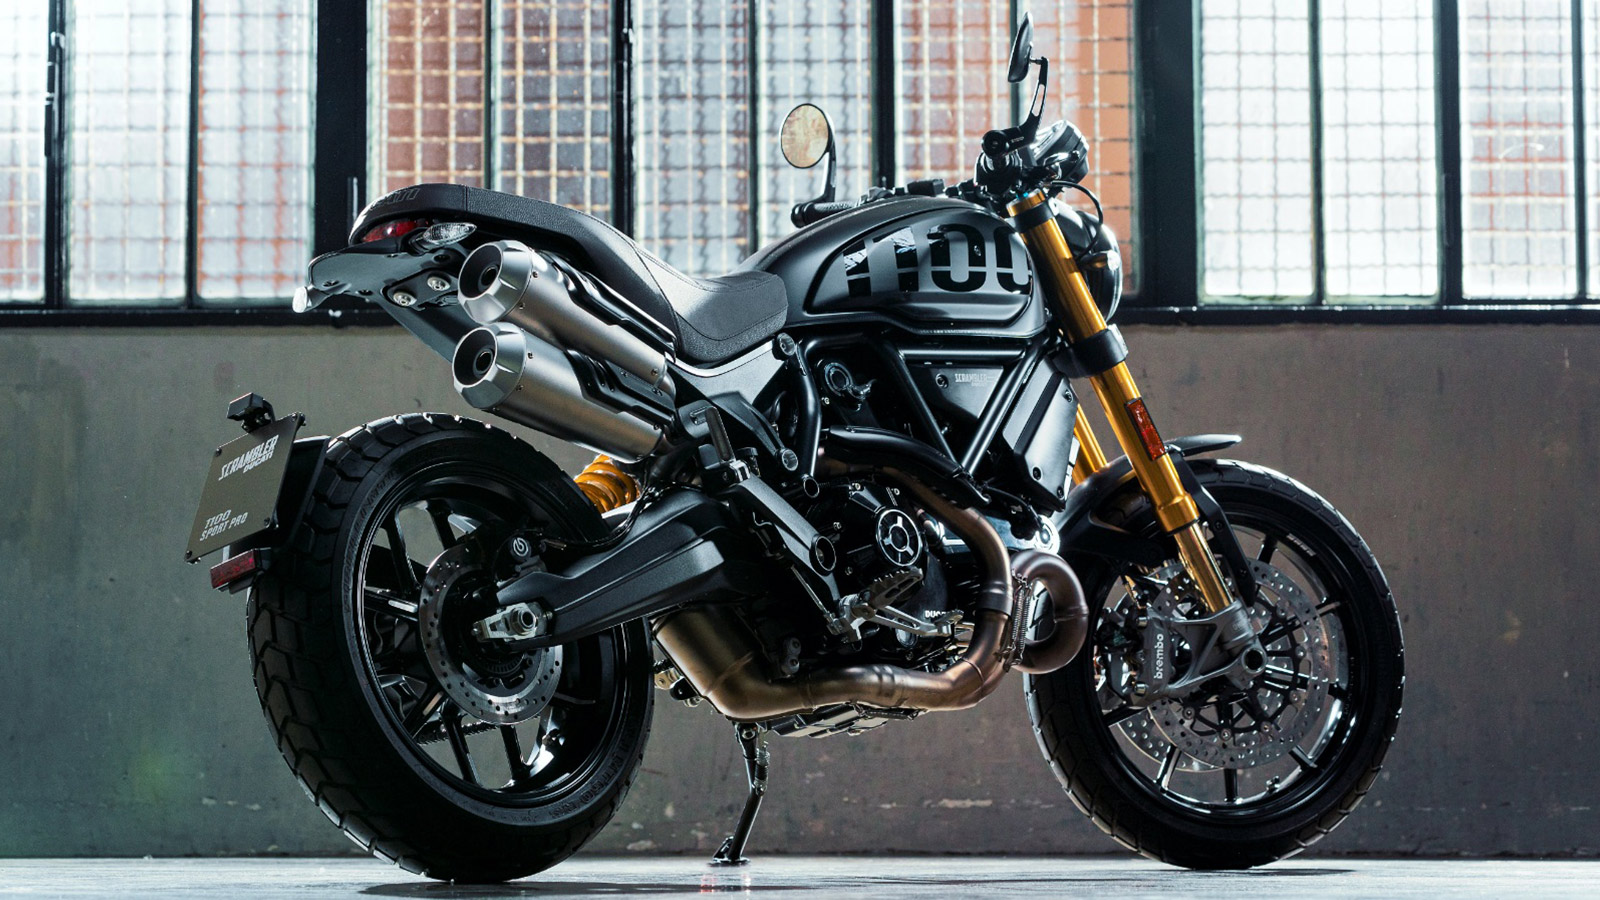 The New Ducati Scrambler Hits Dealers in March - IMBOLDN